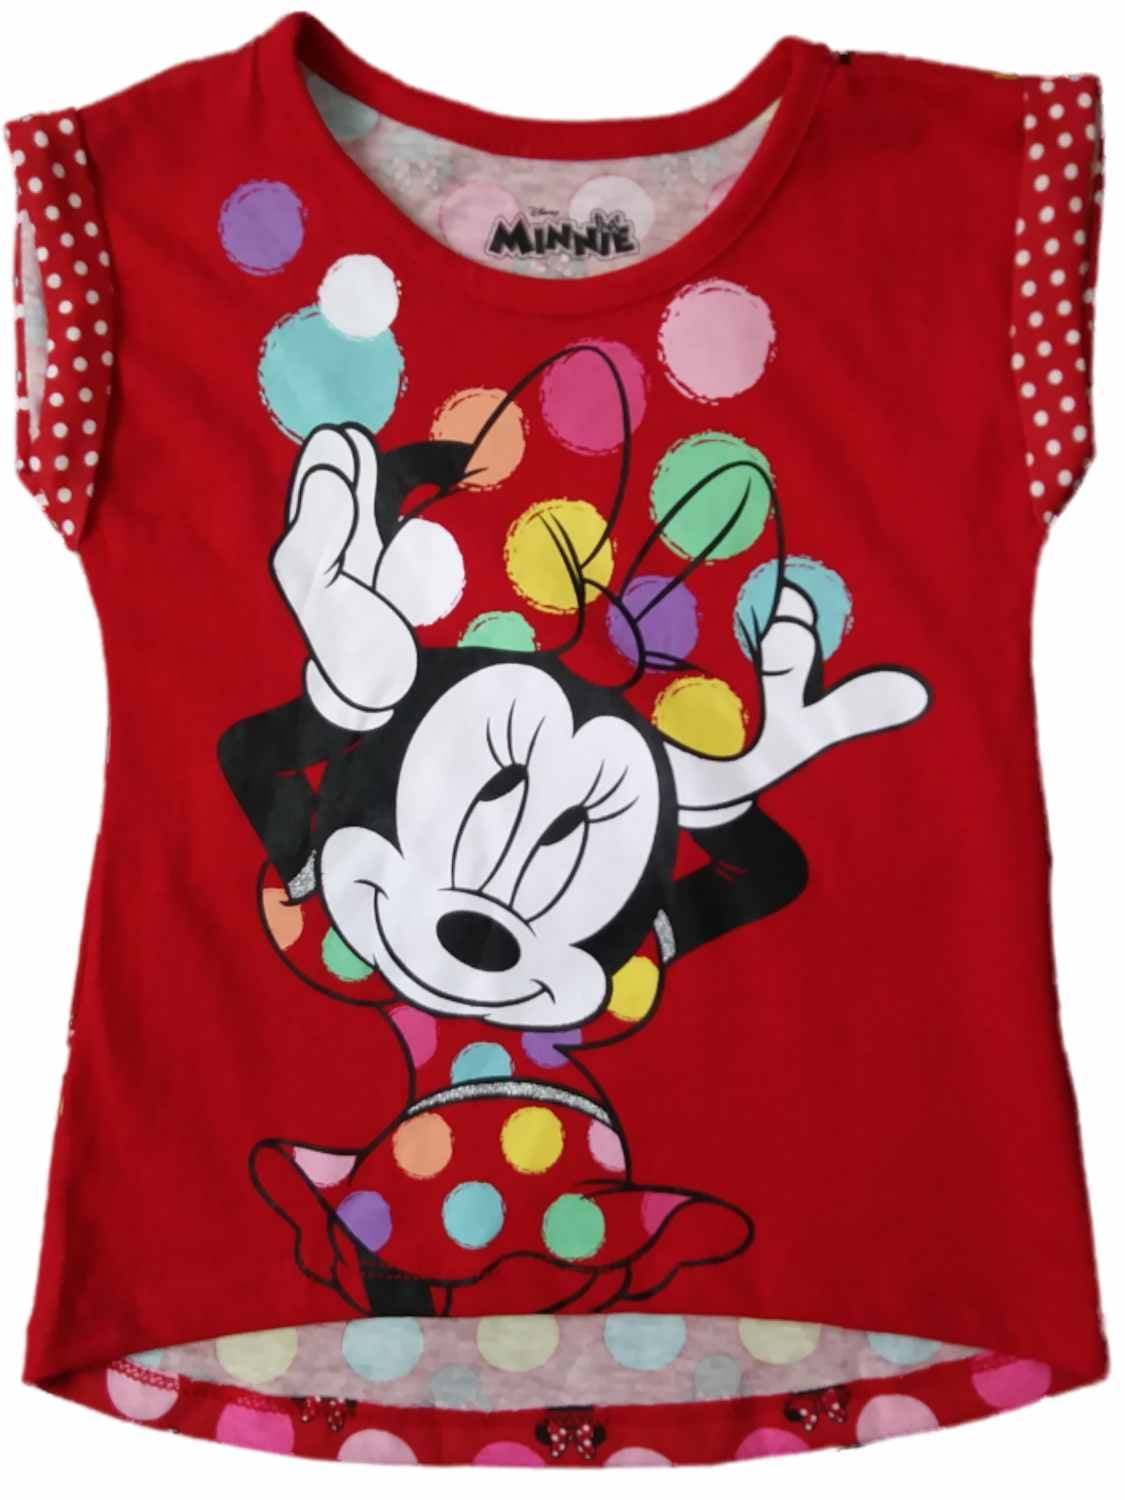 Minnie Mouse Toddler Girl Ruffle Hem Tee Shirt Red Size 2T NEW 